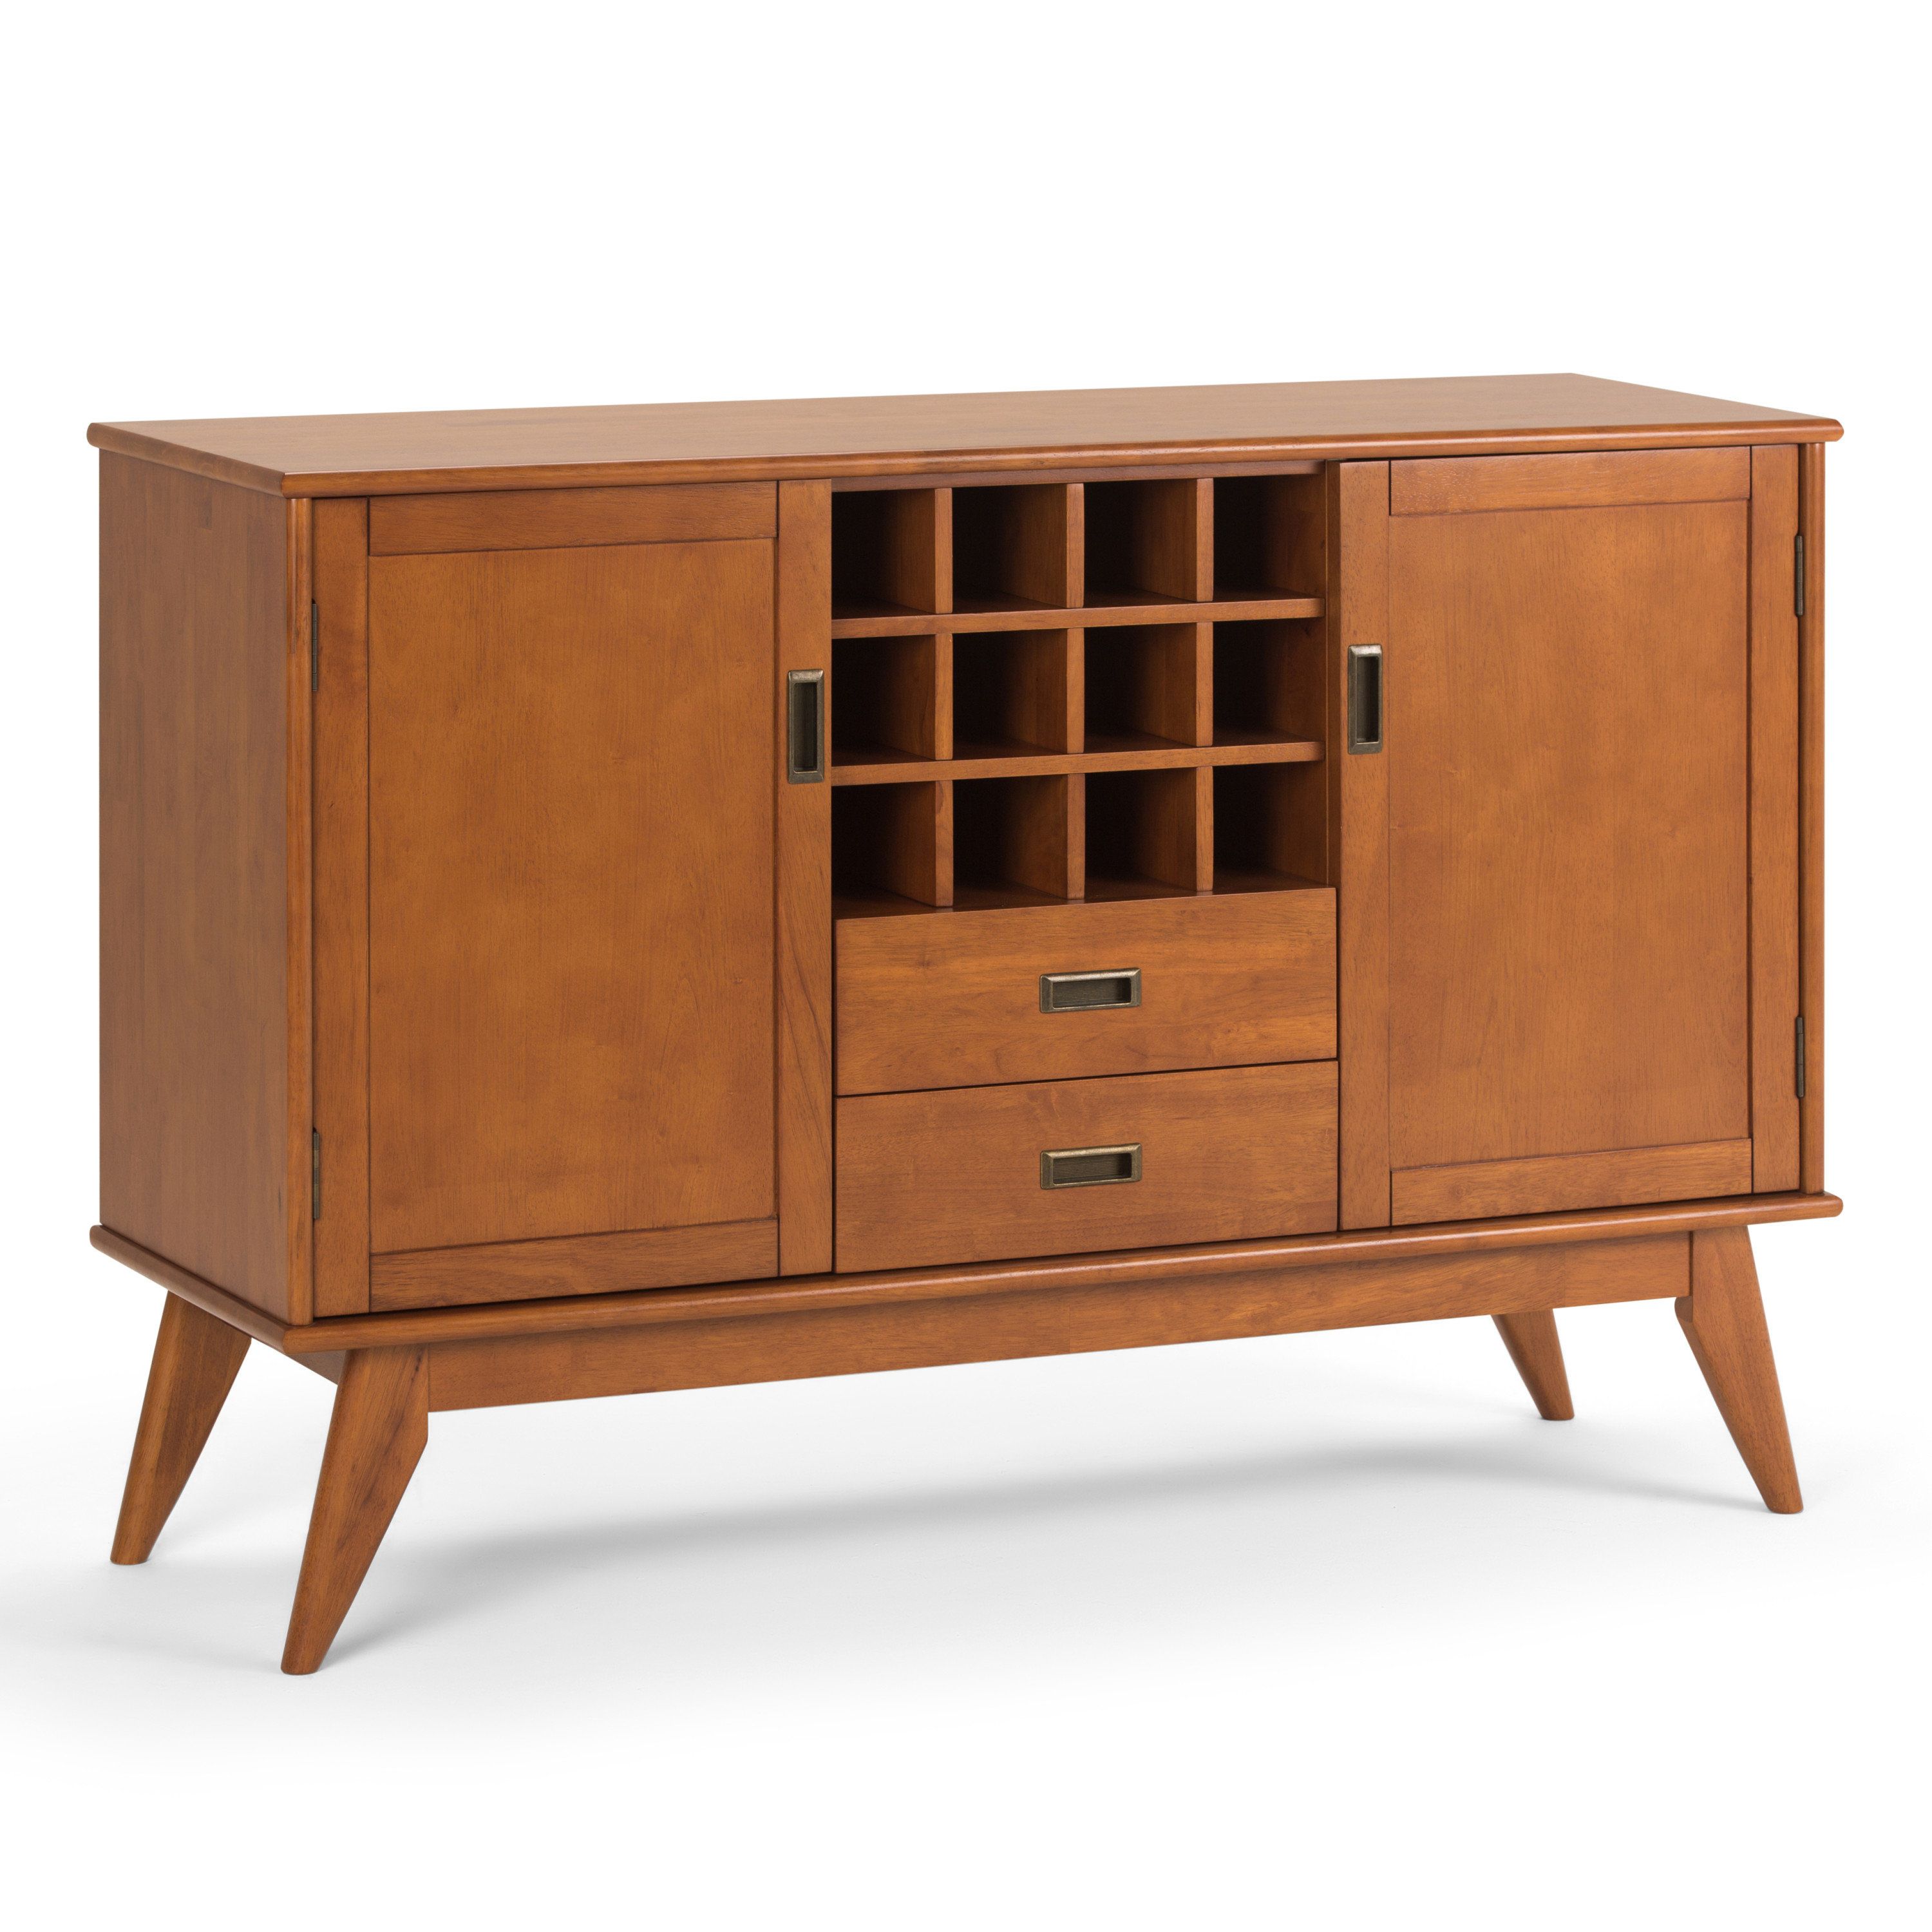 Halvorson Buffet Table Regarding Contemporary Wooden Buffets With One Side Door Storage Cabinets And Two Drawers (View 7 of 30)